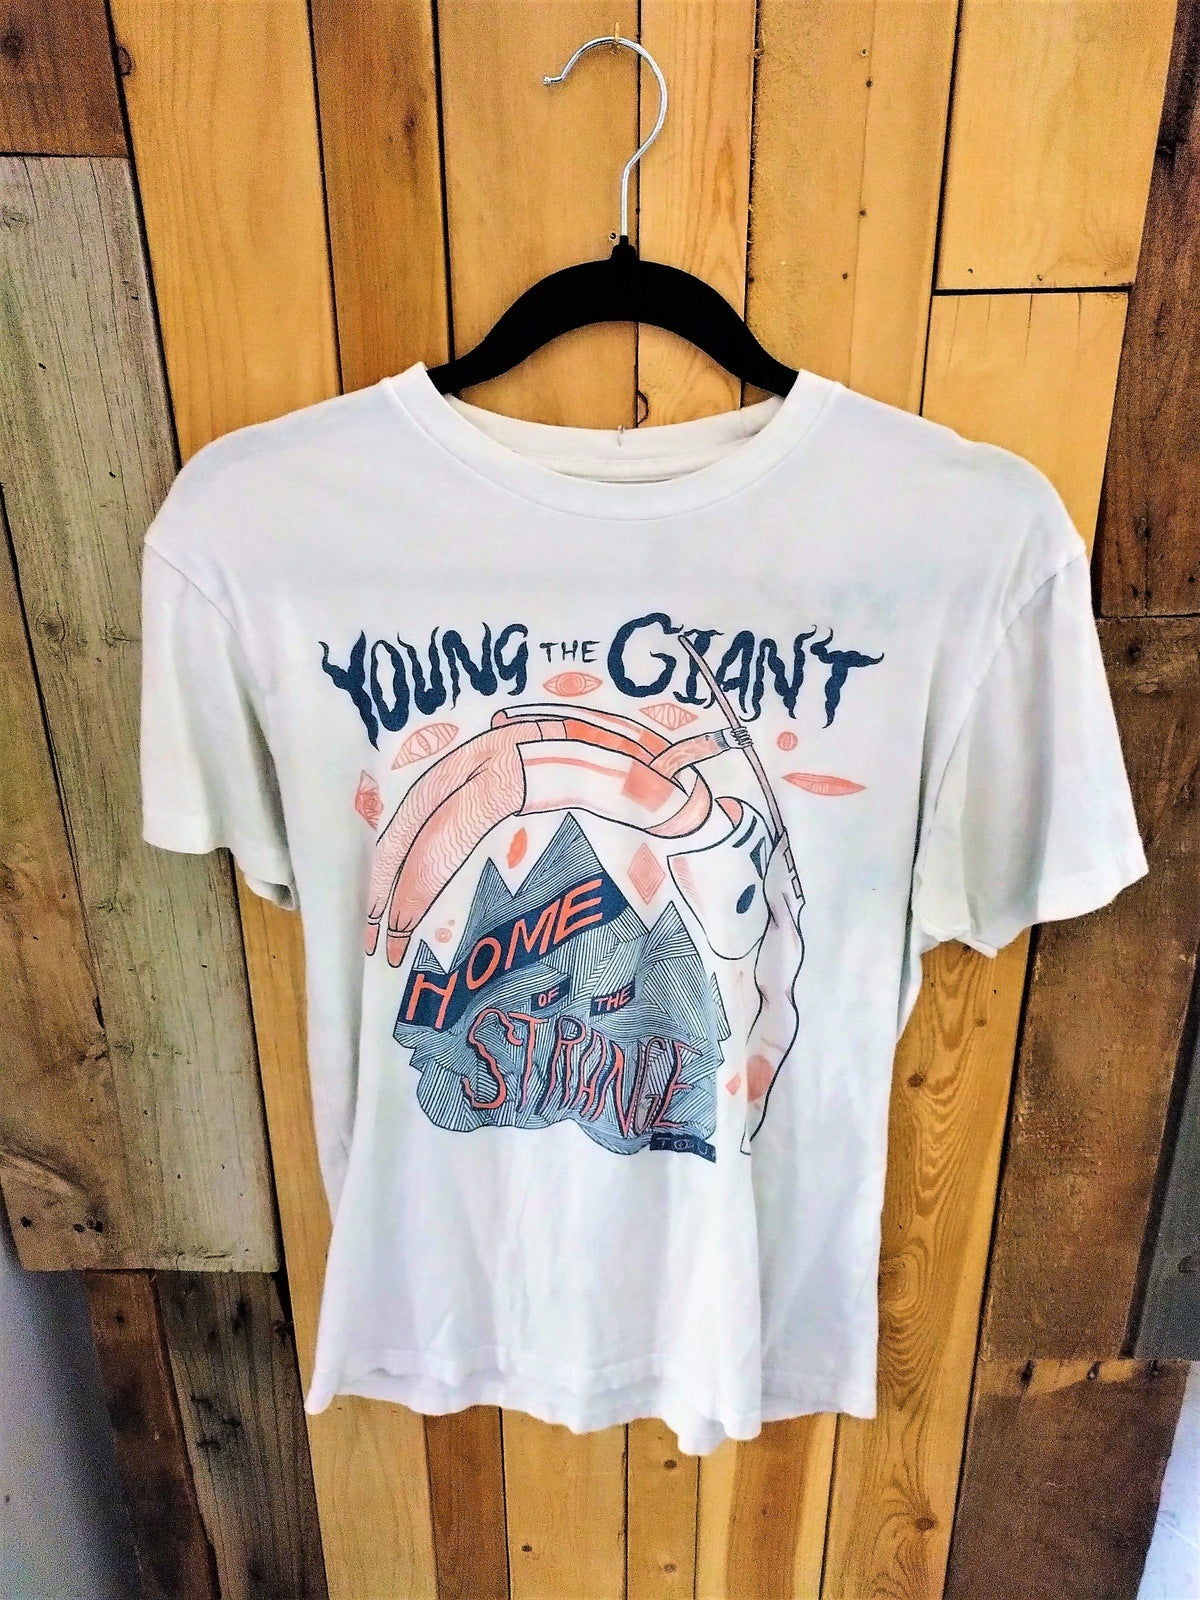 Young the Giant Tour Shirt "Home of the Strange" Size Small